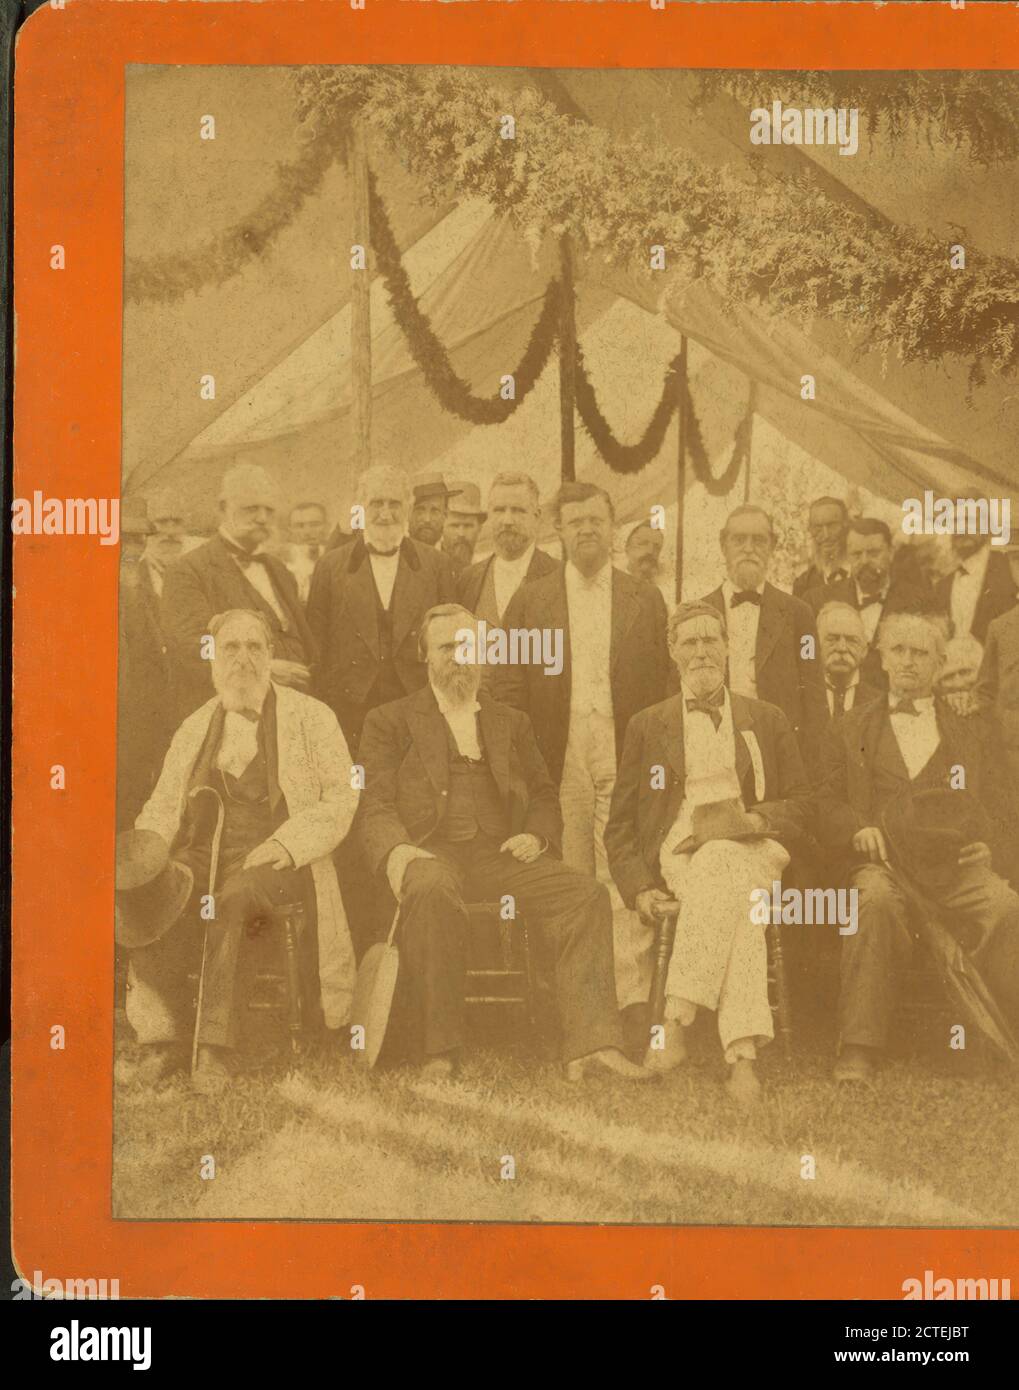 Men seated and standing in festooned tent., Beckwith, E. W., 1878, Pennsylvania Stock Photo